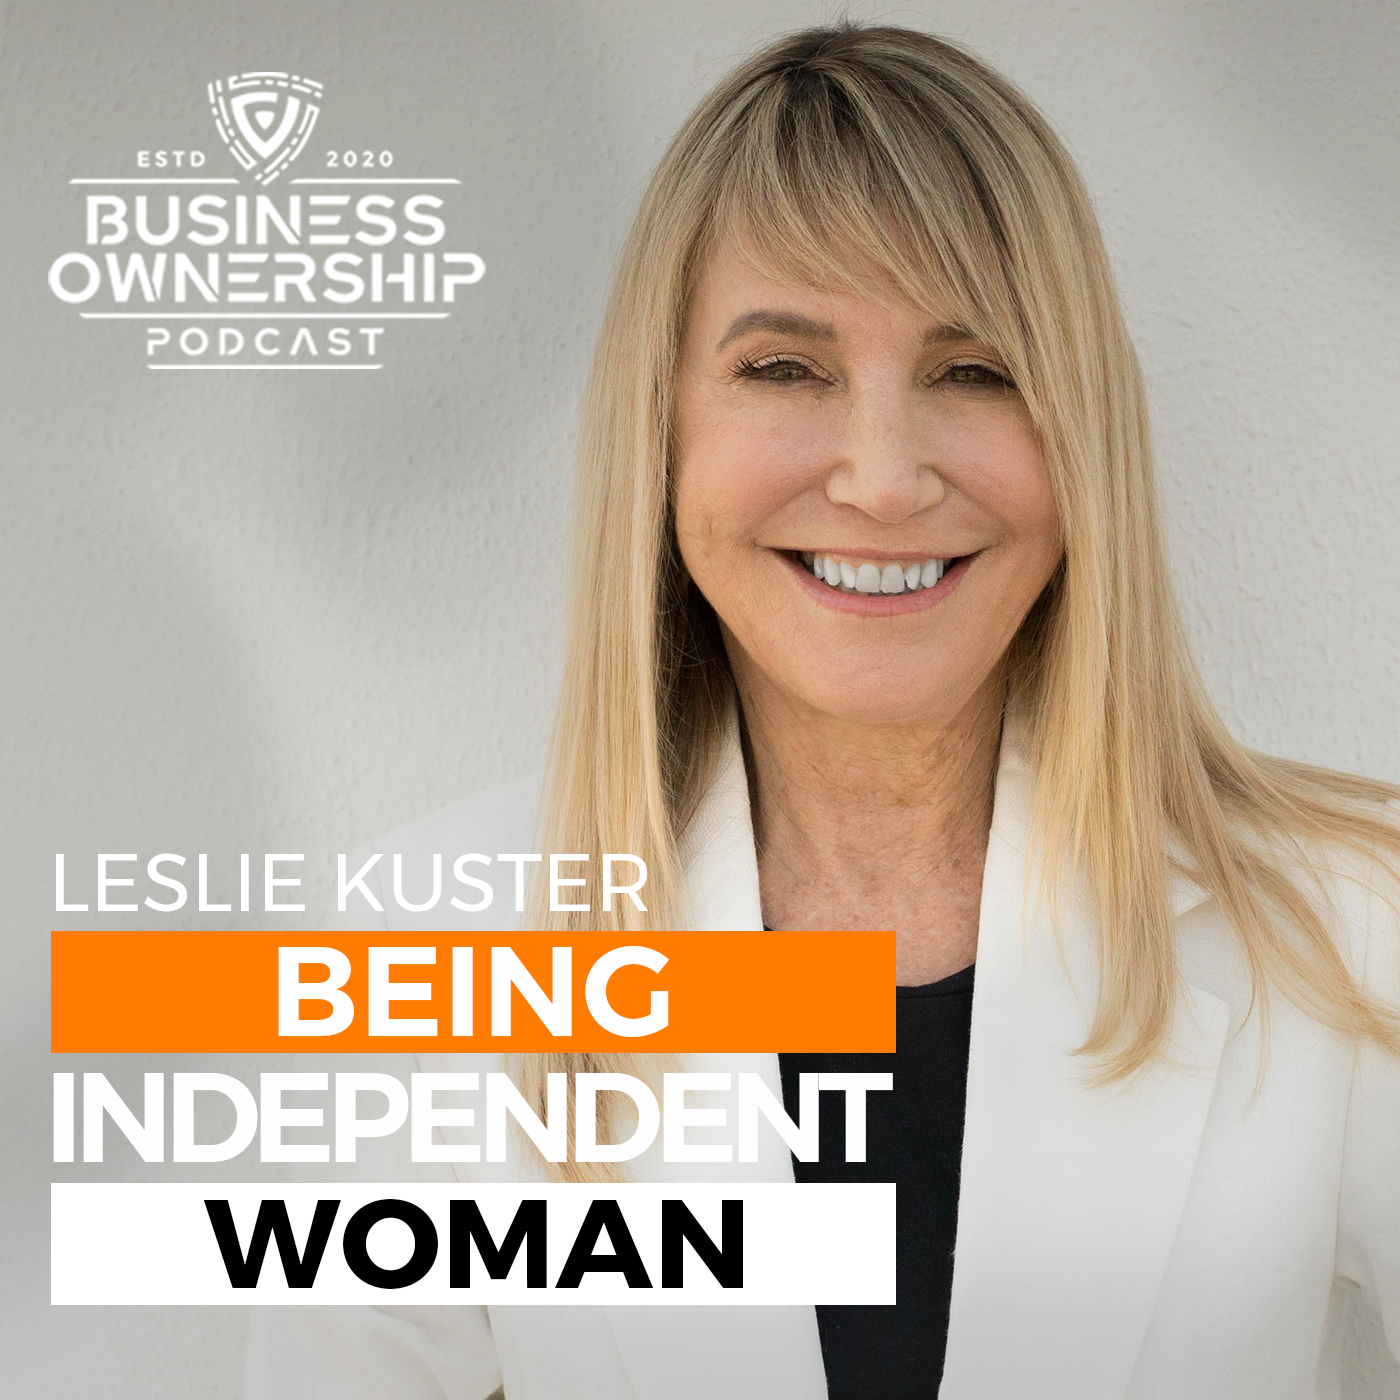 Leslie Kuster Being Independent Woman Podcast